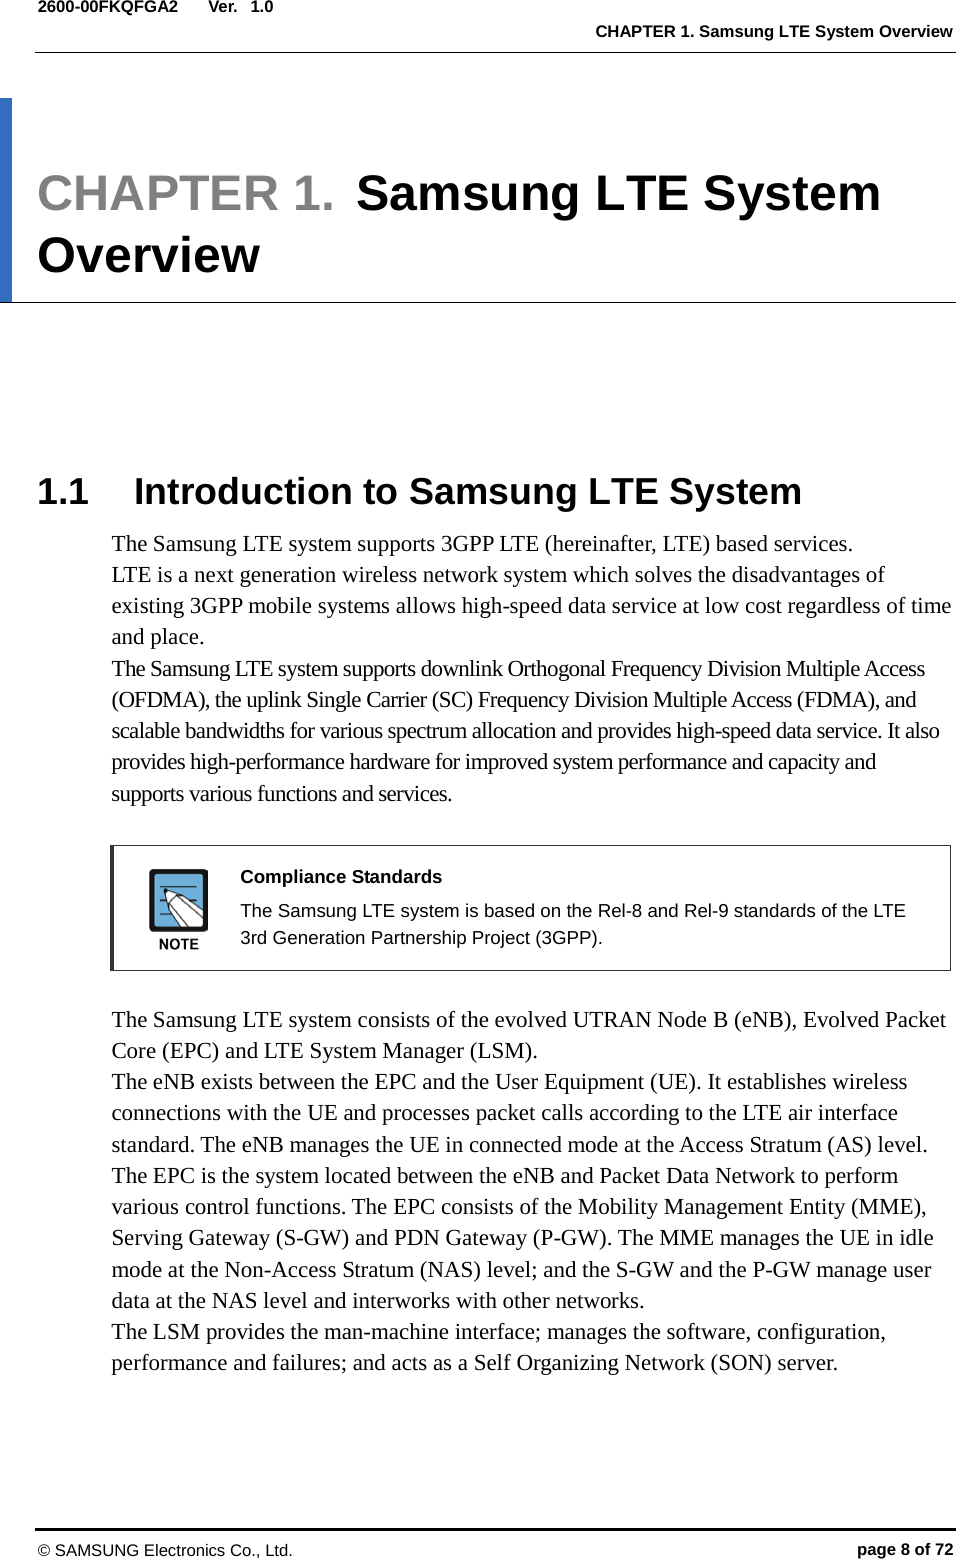  Ver.  CHAPTER 1. Samsung LTE System Overview 2600-00FKQFGA2 1.0 CHAPTER 1. Samsung LTE System Overview      1.1 Introduction to Samsung LTE System The Samsung LTE system supports 3GPP LTE (hereinafter, LTE) based services.   LTE is a next generation wireless network system which solves the disadvantages of existing 3GPP mobile systems allows high-speed data service at low cost regardless of time and place. The Samsung LTE system supports downlink Orthogonal Frequency Division Multiple Access (OFDMA), the uplink Single Carrier (SC) Frequency Division Multiple Access (FDMA), and scalable bandwidths for various spectrum allocation and provides high-speed data service. It also provides high-performance hardware for improved system performance and capacity and supports various functions and services.     Compliance Standards  The Samsung LTE system is based on the Rel-8 and Rel-9 standards of the LTE 3rd Generation Partnership Project (3GPP).  The Samsung LTE system consists of the evolved UTRAN Node B (eNB), Evolved Packet Core (EPC) and LTE System Manager (LSM).   The eNB exists between the EPC and the User Equipment (UE). It establishes wireless connections with the UE and processes packet calls according to the LTE air interface standard. The eNB manages the UE in connected mode at the Access Stratum (AS) level. The EPC is the system located between the eNB and Packet Data Network to perform various control functions. The EPC consists of the Mobility Management Entity (MME), Serving Gateway (S-GW) and PDN Gateway (P-GW). The MME manages the UE in idle mode at the Non-Access Stratum (NAS) level; and the S-GW and the P-GW manage user data at the NAS level and interworks with other networks. The LSM provides the man-machine interface; manages the software, configuration, performance and failures; and acts as a Self Organizing Network (SON) server.  © SAMSUNG Electronics Co., Ltd. page 8 of 72 